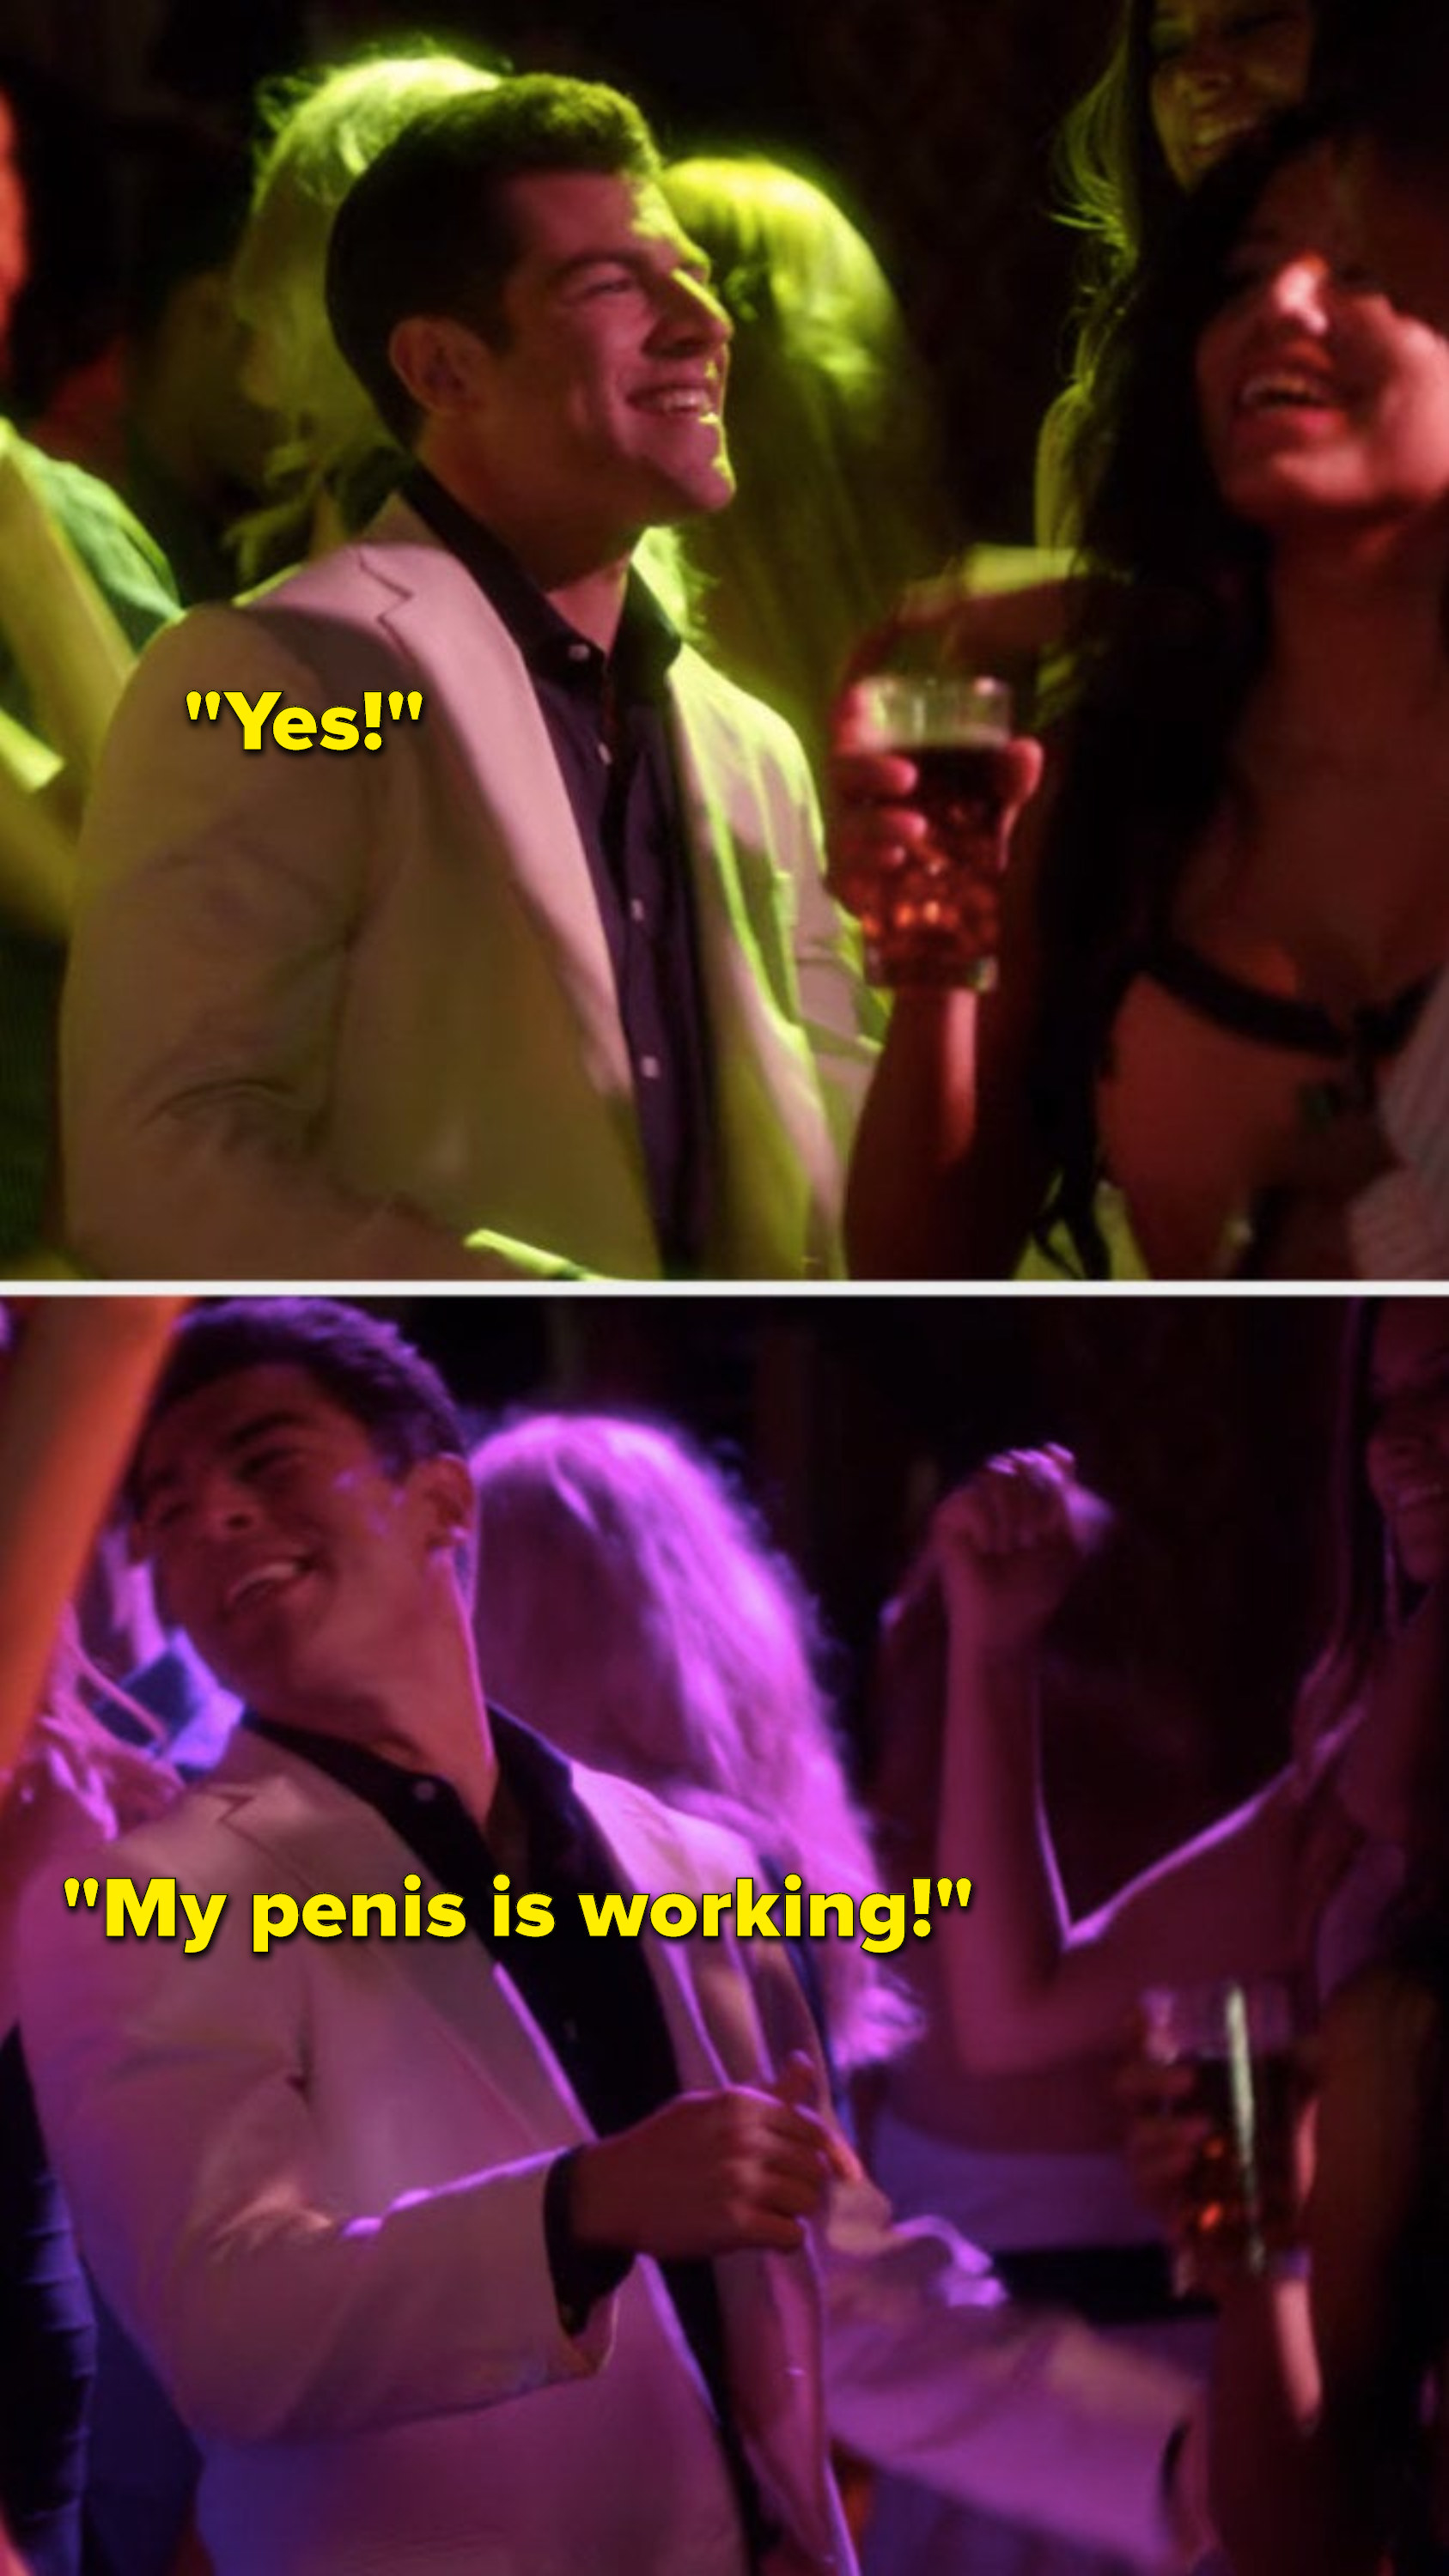 Schmidt is dancing and says, Yes, my penis is working